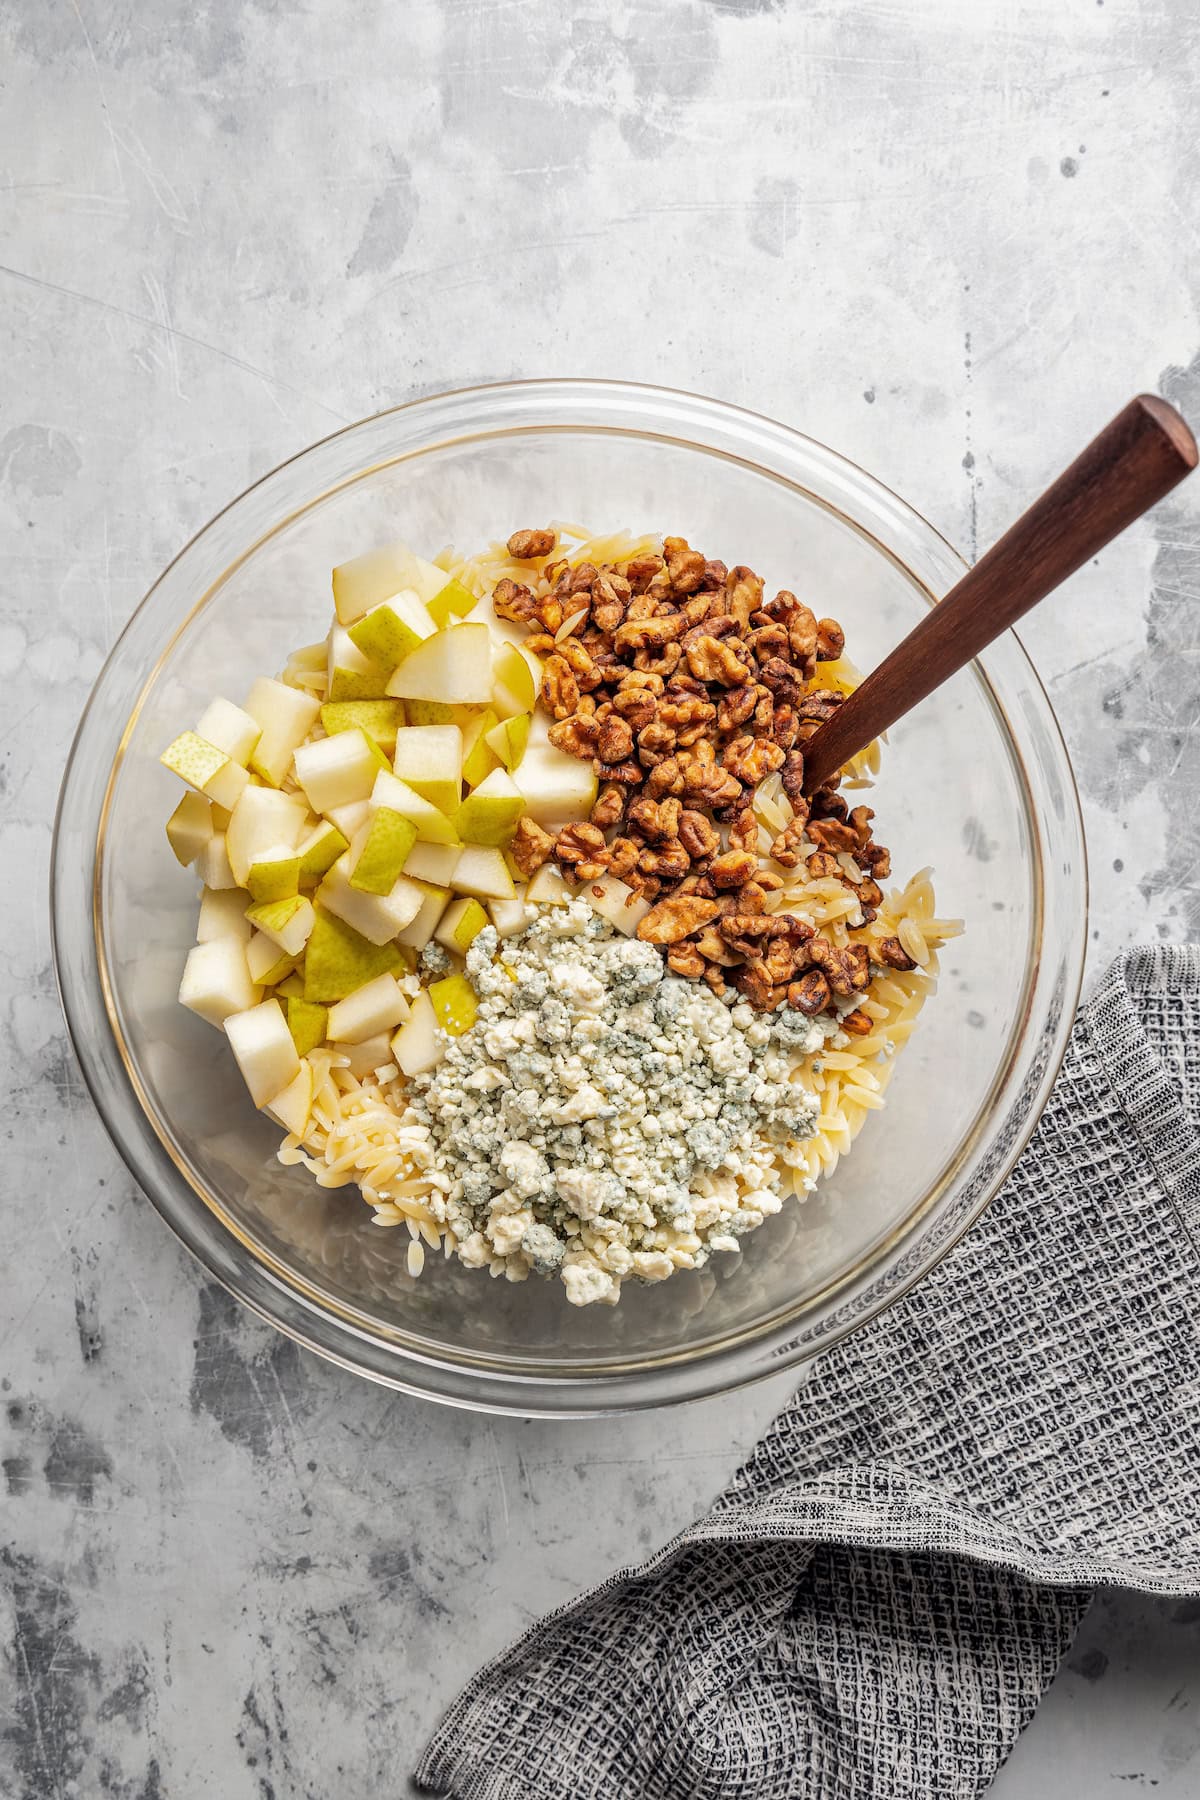 Orzo, walnuts, pears, and gorgonzola cheese combined in a glass bowl.